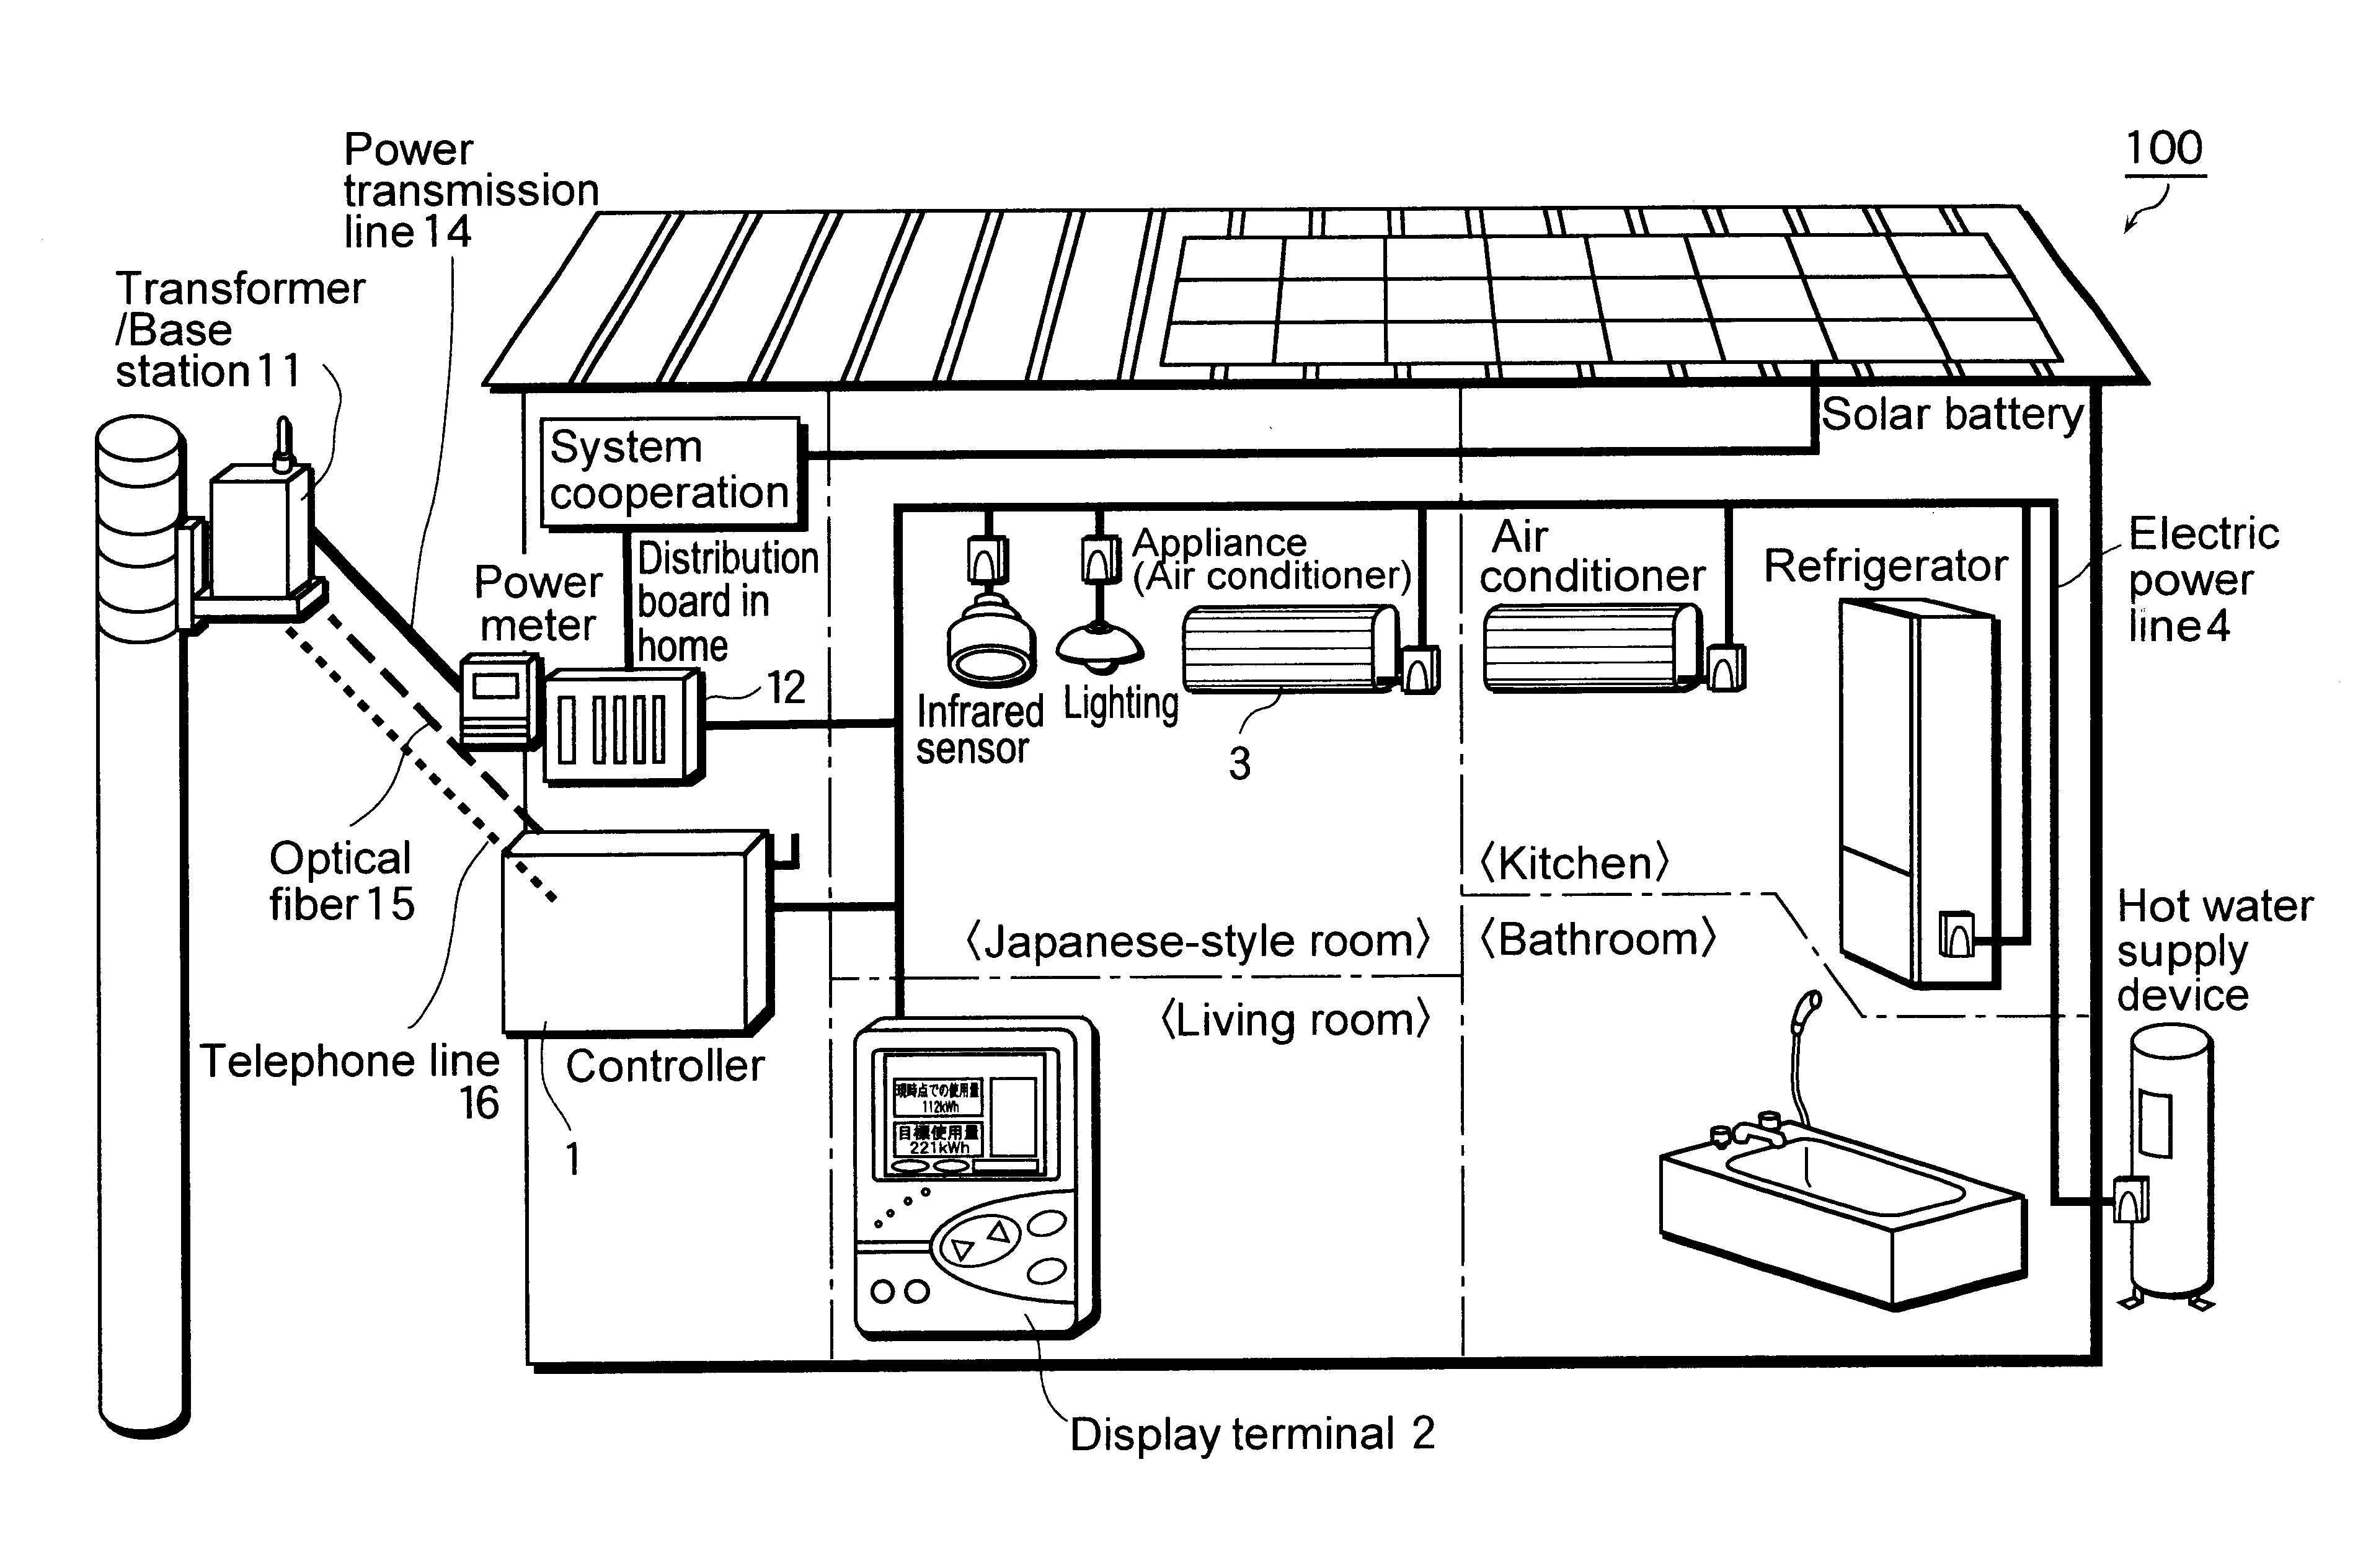 Appliance data collecting system